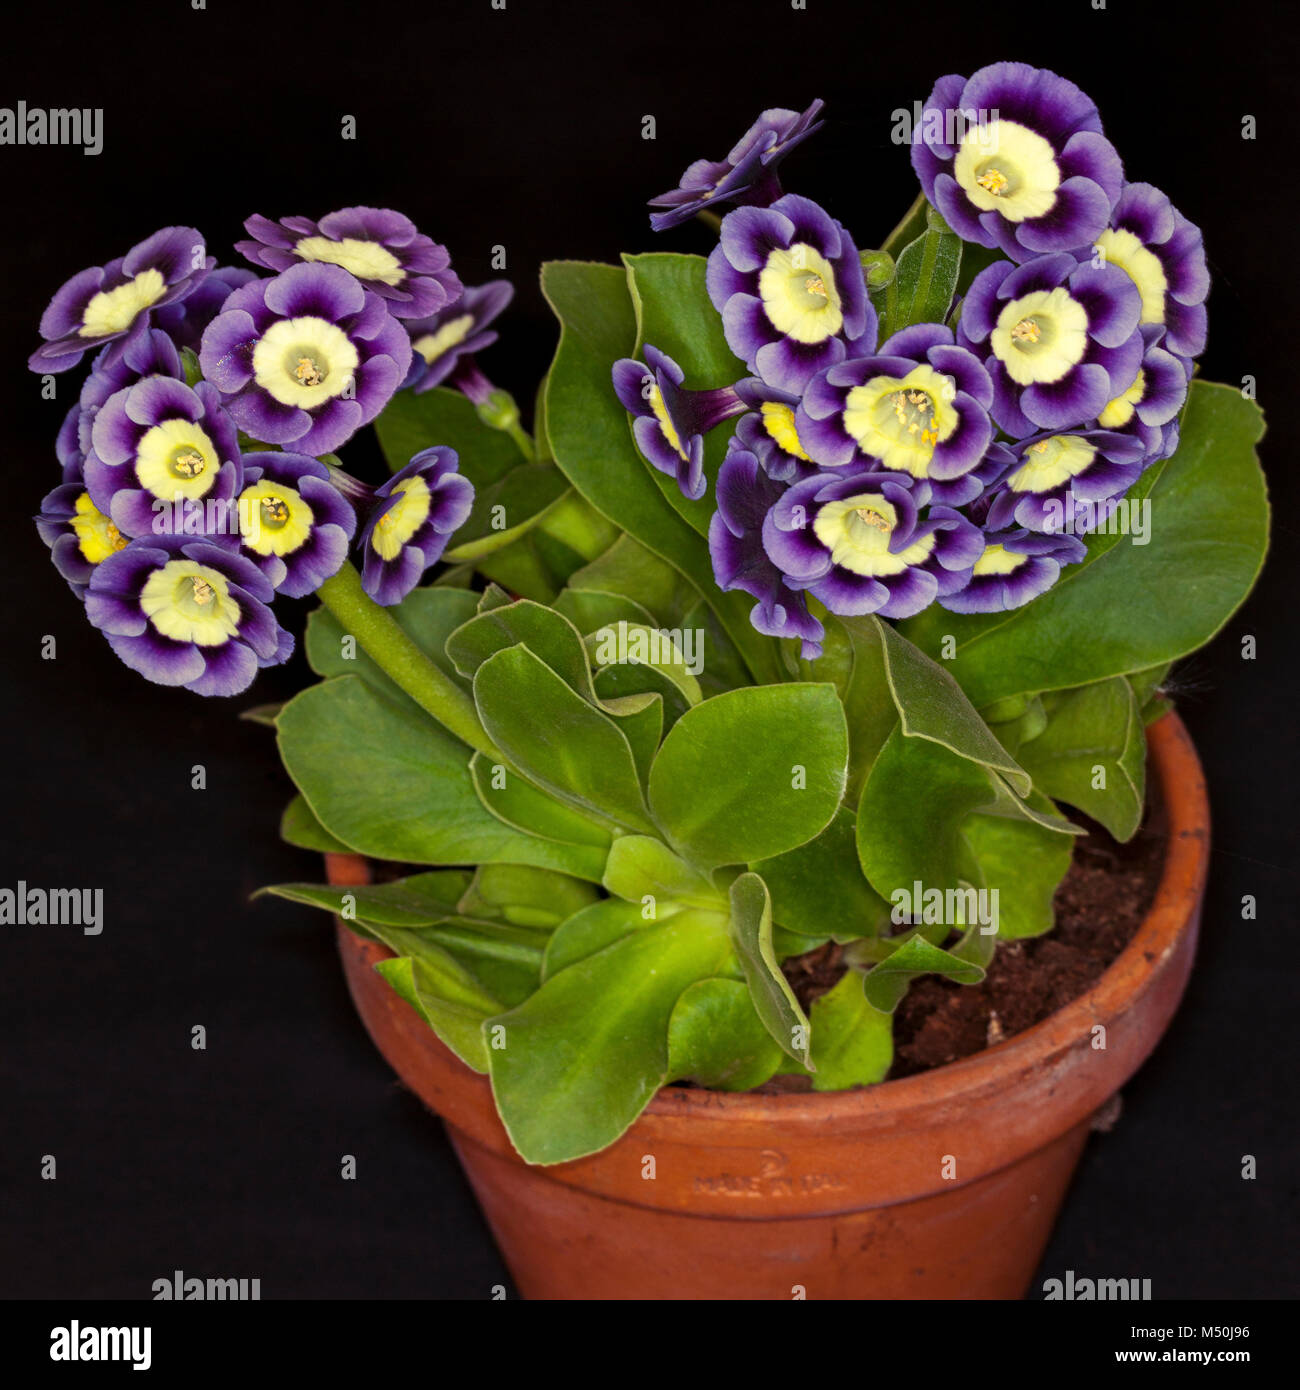 Primula auricula 'Merridale' in a terracotta plant pot isolated on a black background Stock Photo